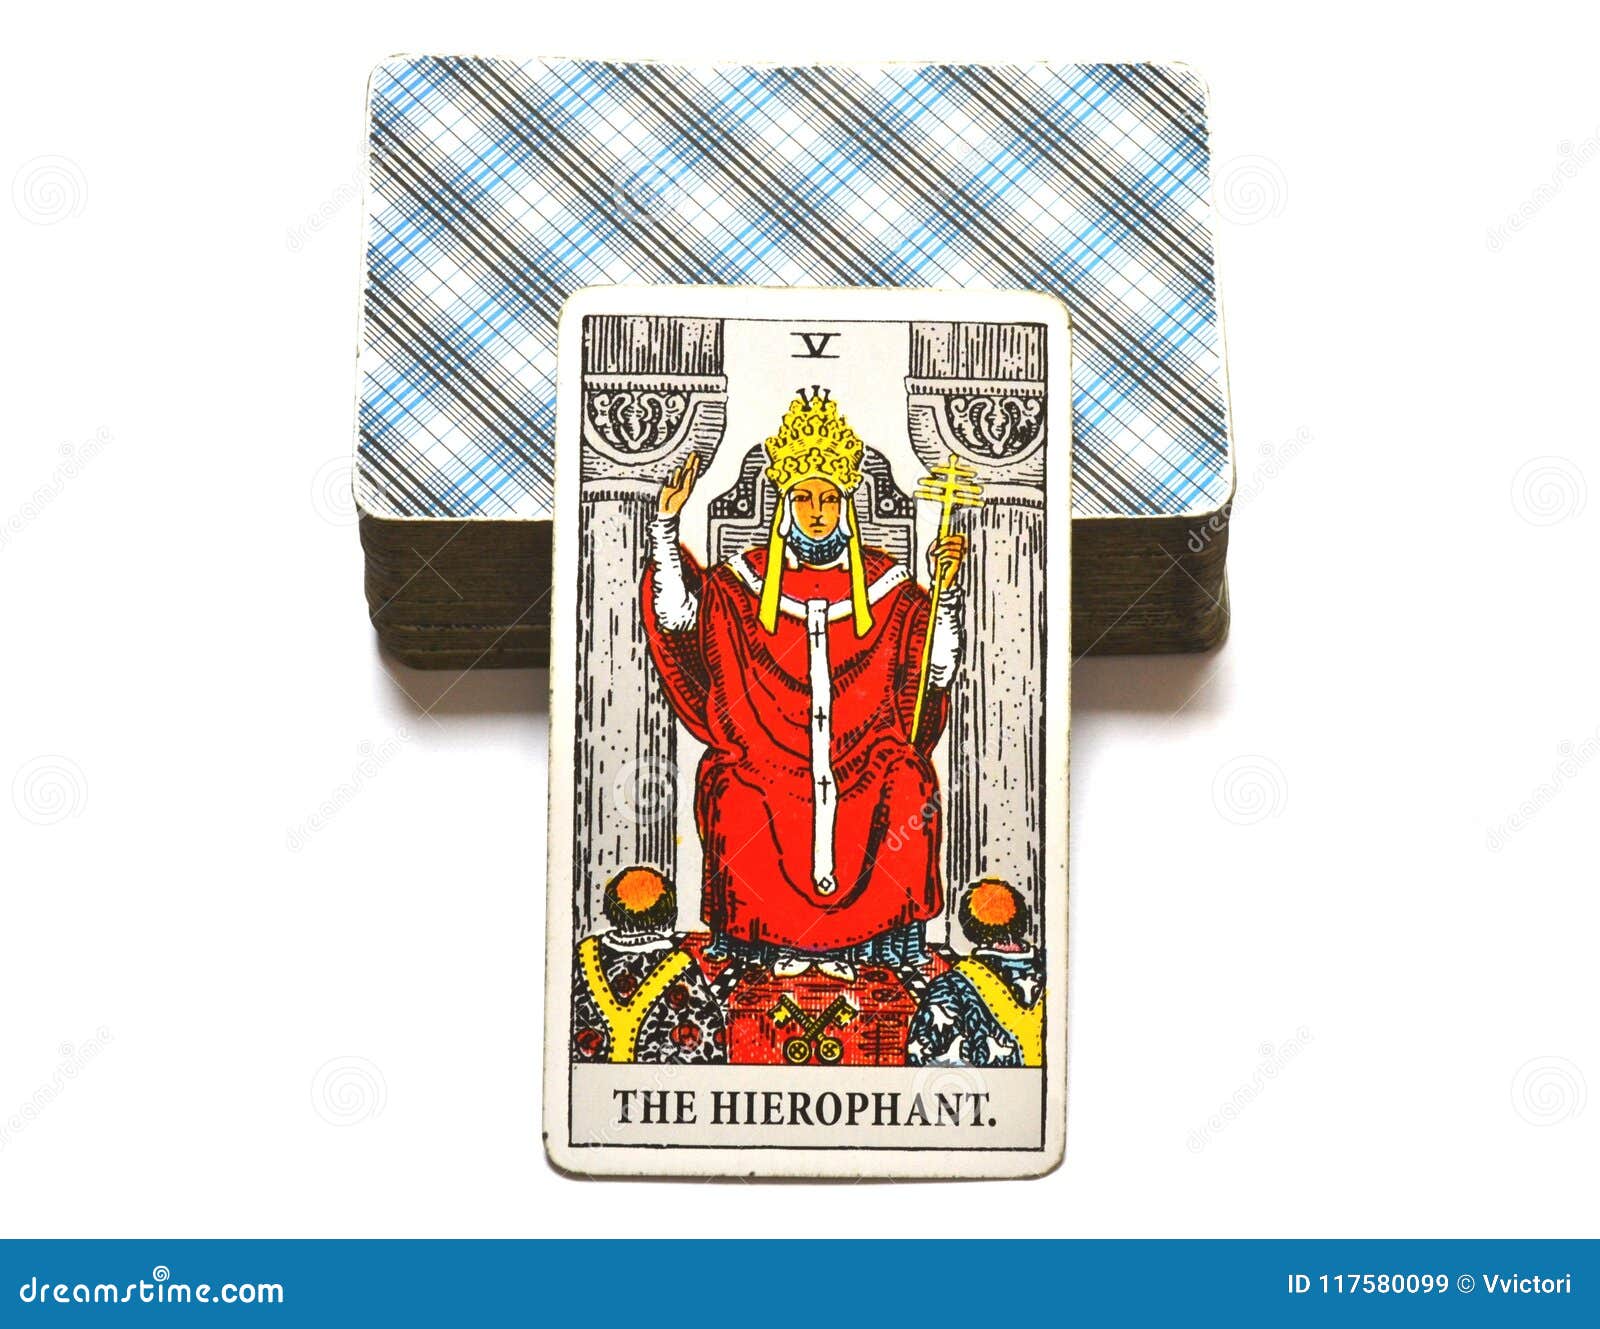 the hierophant tarot card institutions education tradition guru ccult